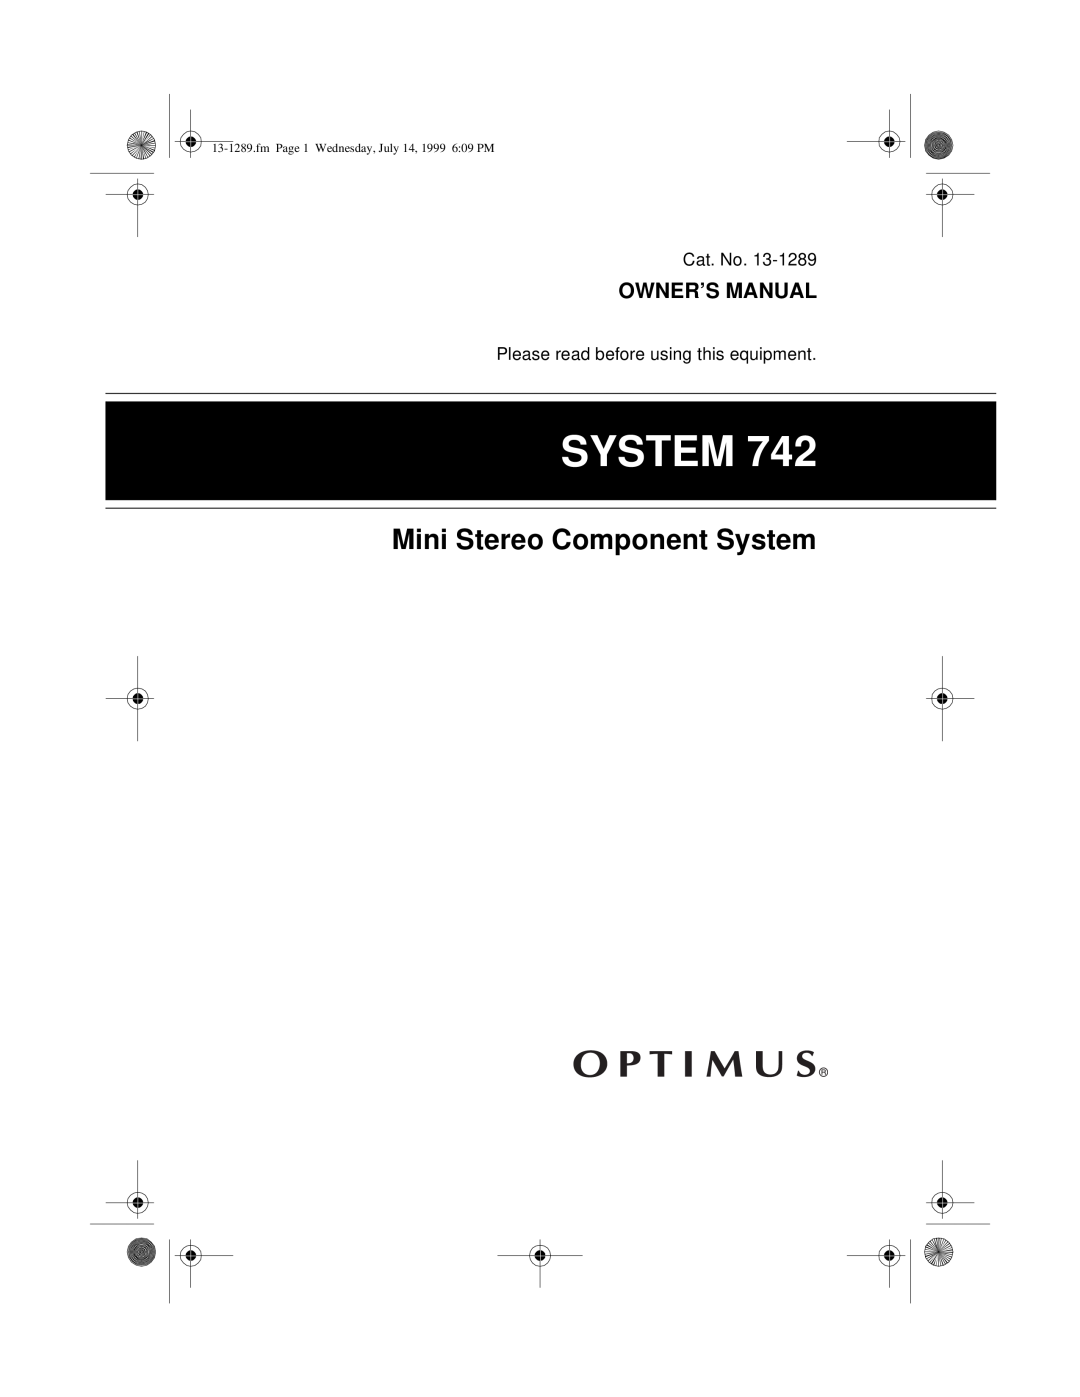 Optimus 742 owner manual Mini Stereo Component System, Owner’S Manual, fmPage 1 Wednesday, July 14, 1999 6:09 PM 